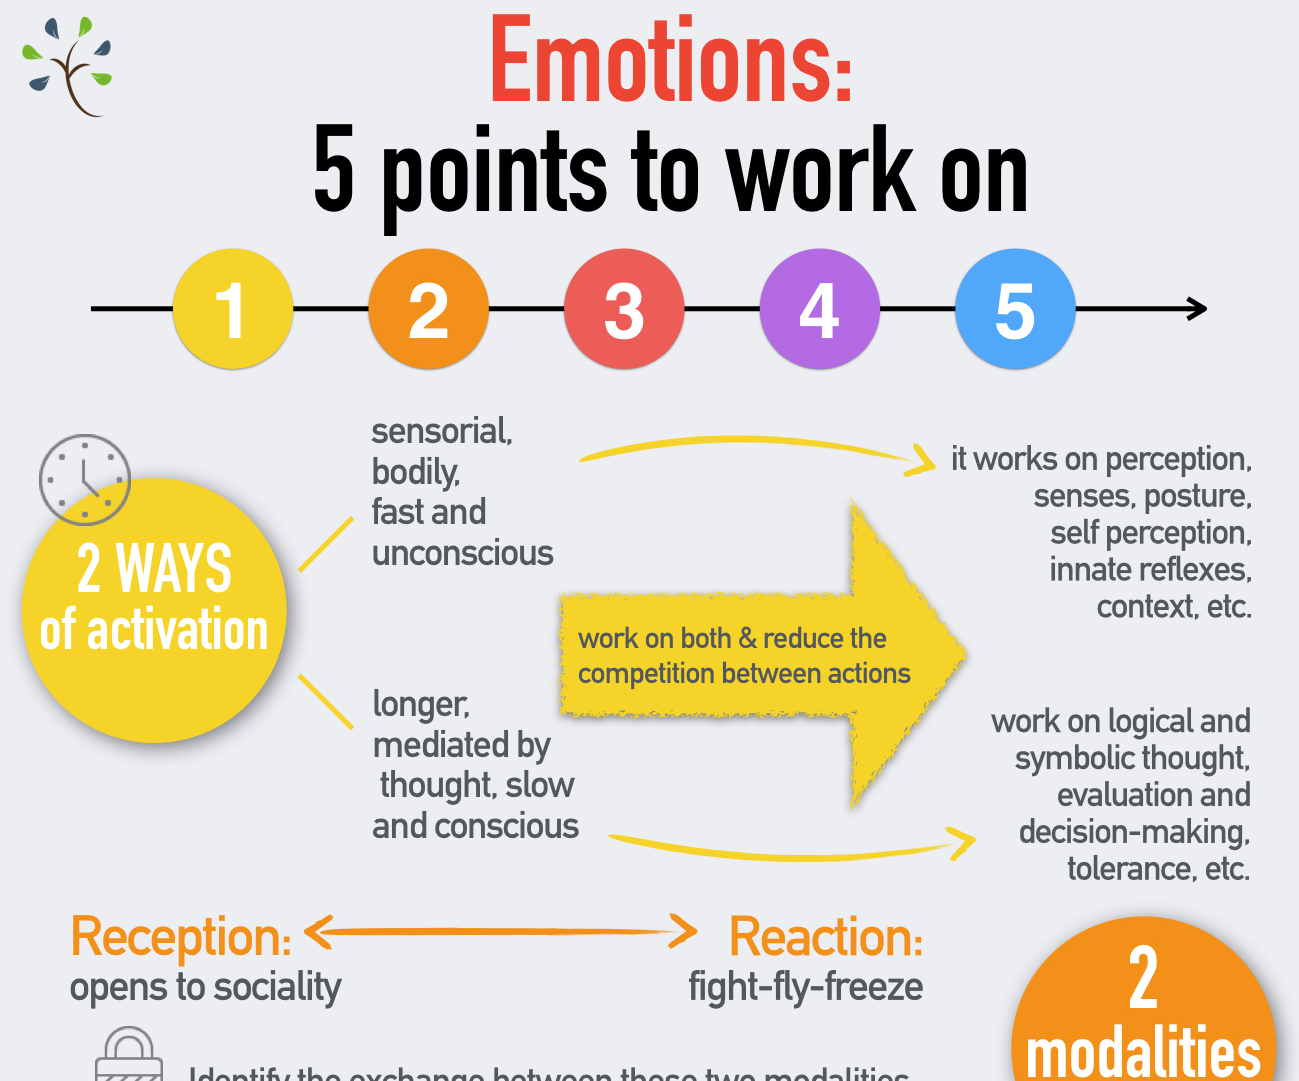 infographic-emotions-5-points-to-work-on-real-way-of-life